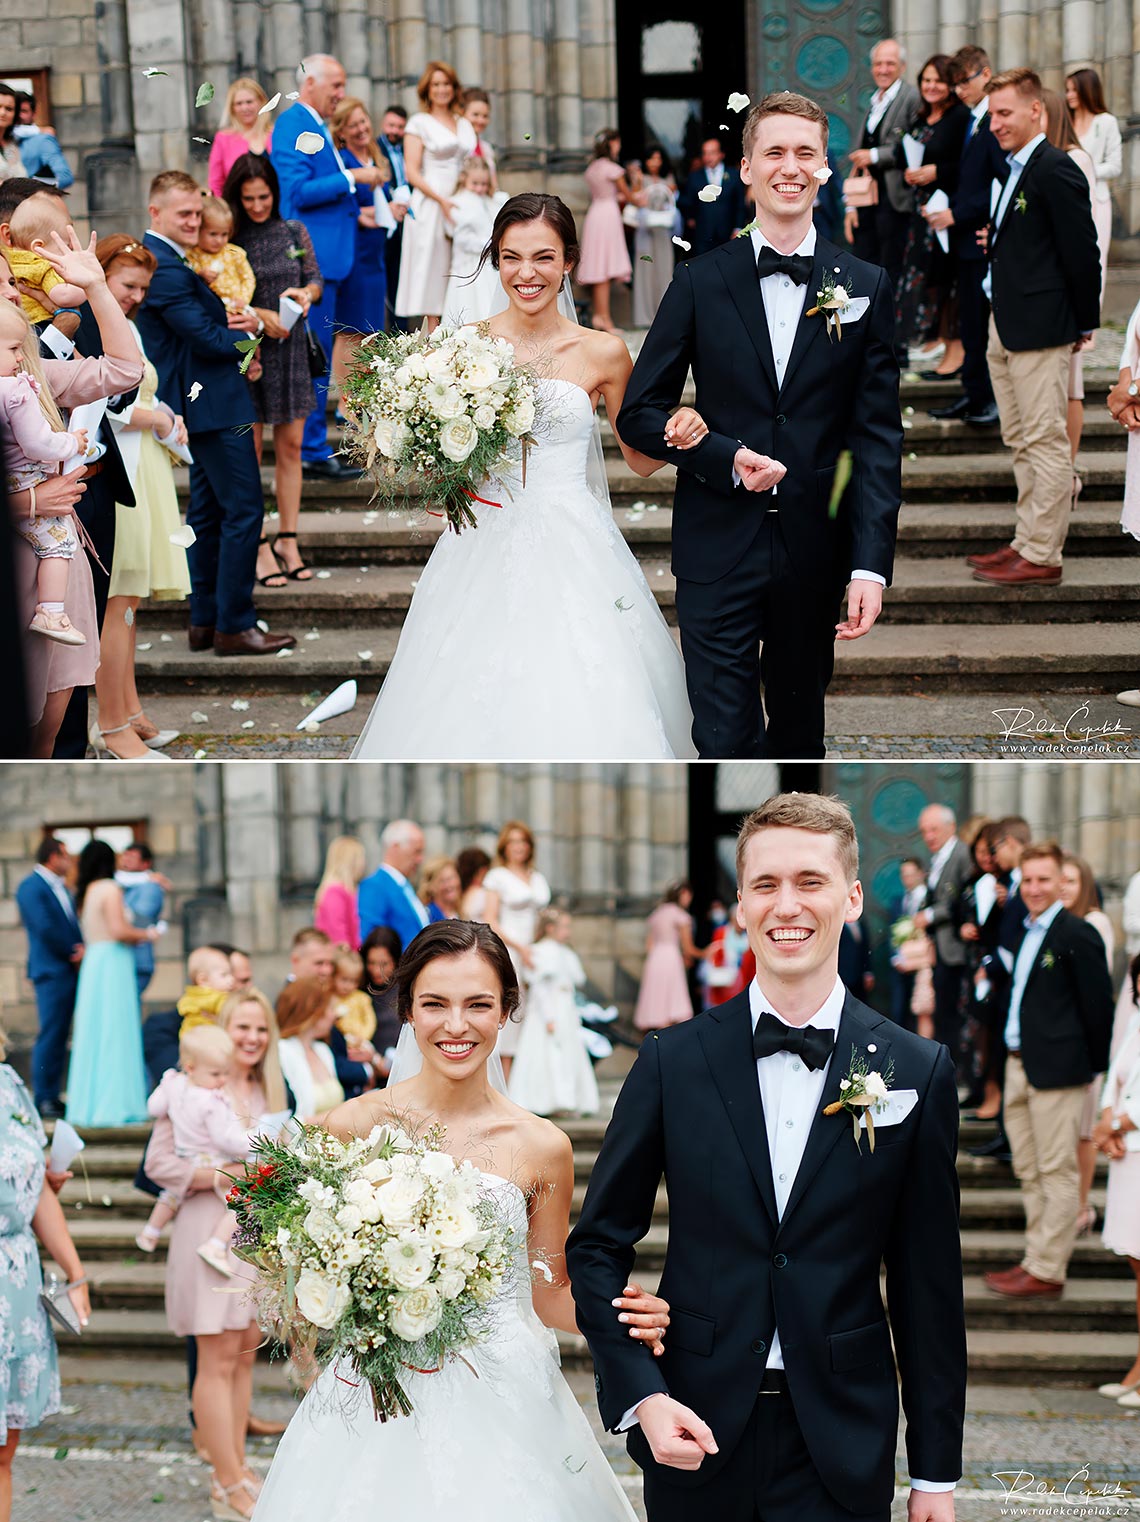 guests throwing floral petals on bride and groom